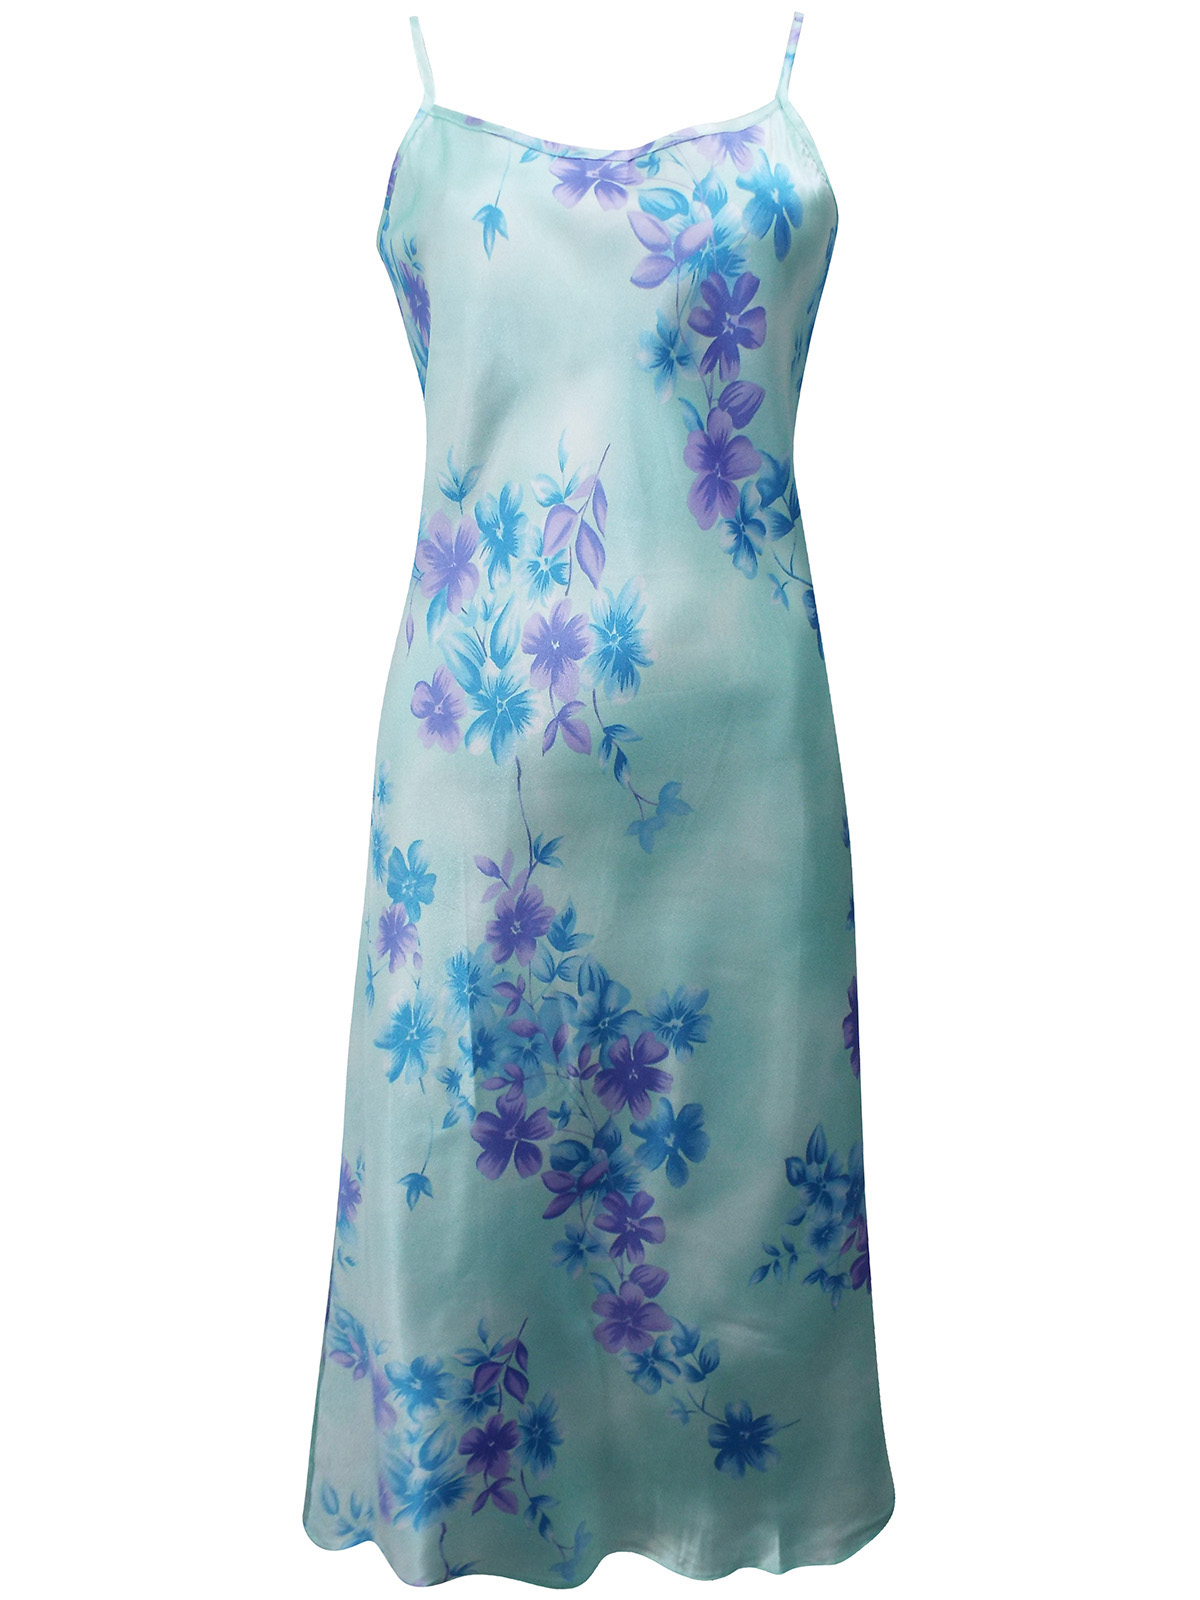 Victoria's Secret AQUA FLORAL Barely There Strap Satin Slip - Size Small to Large